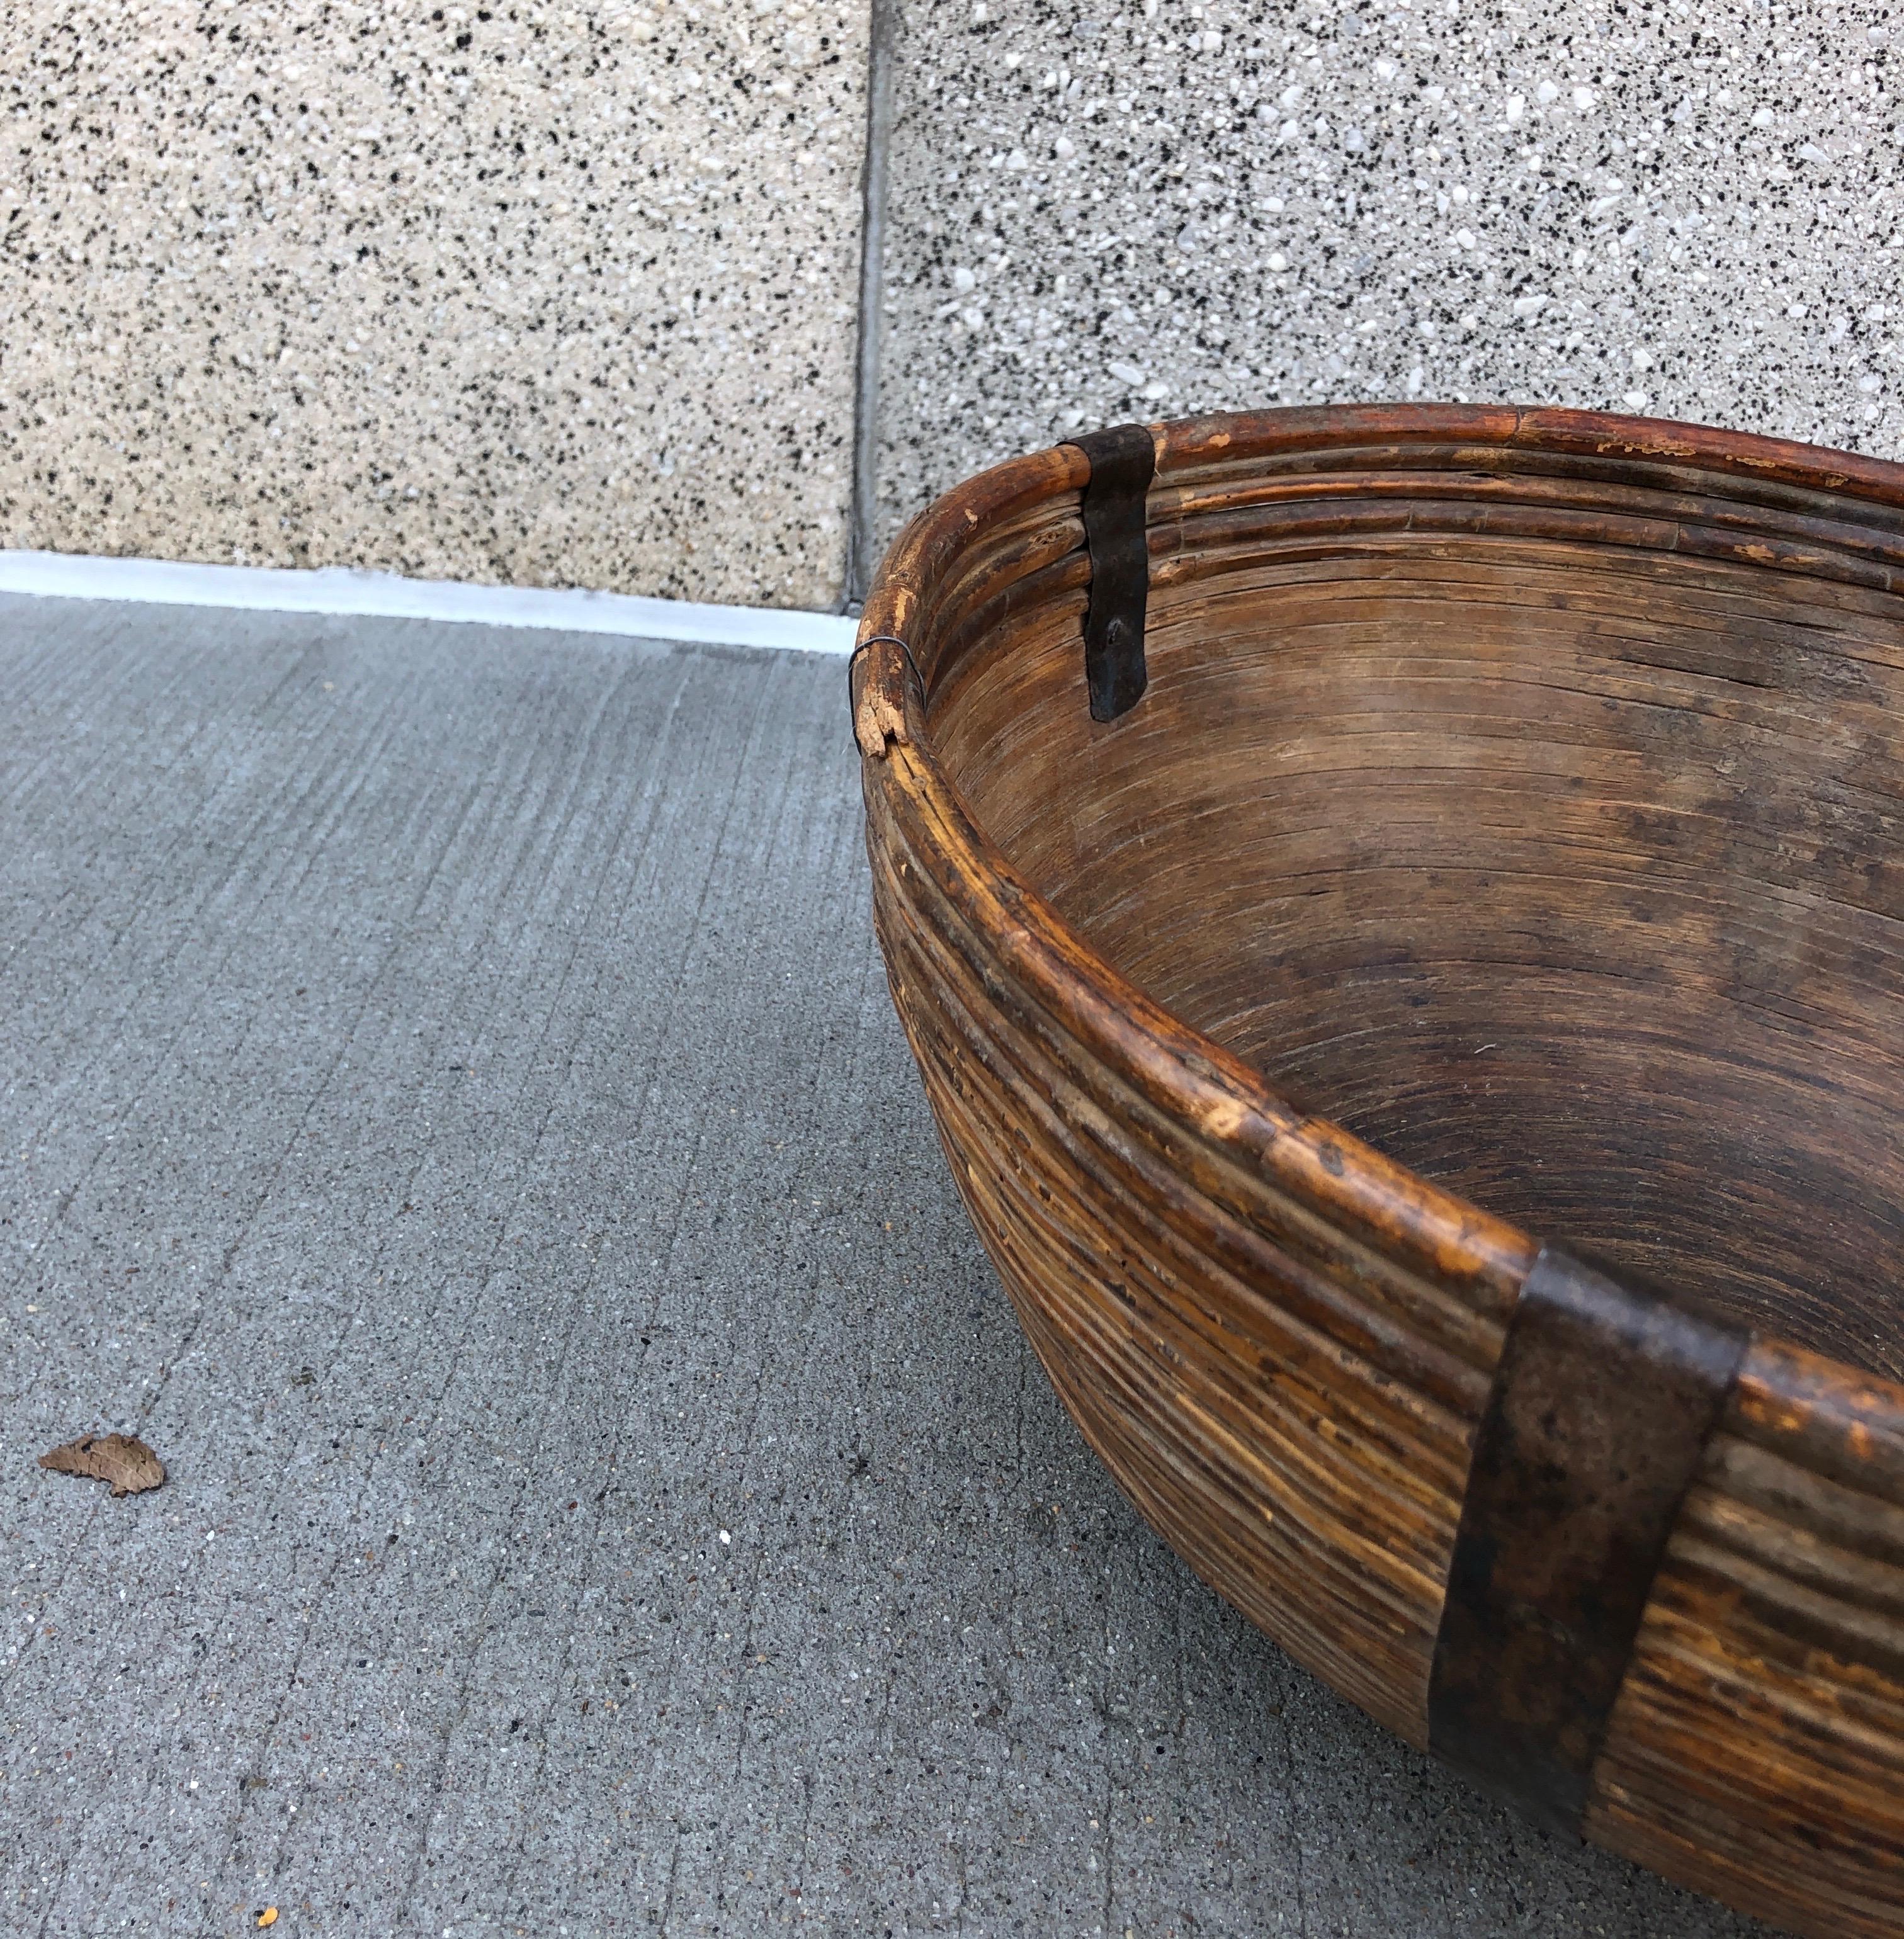 Fiber/Wood Bowl with Metal Supports 2